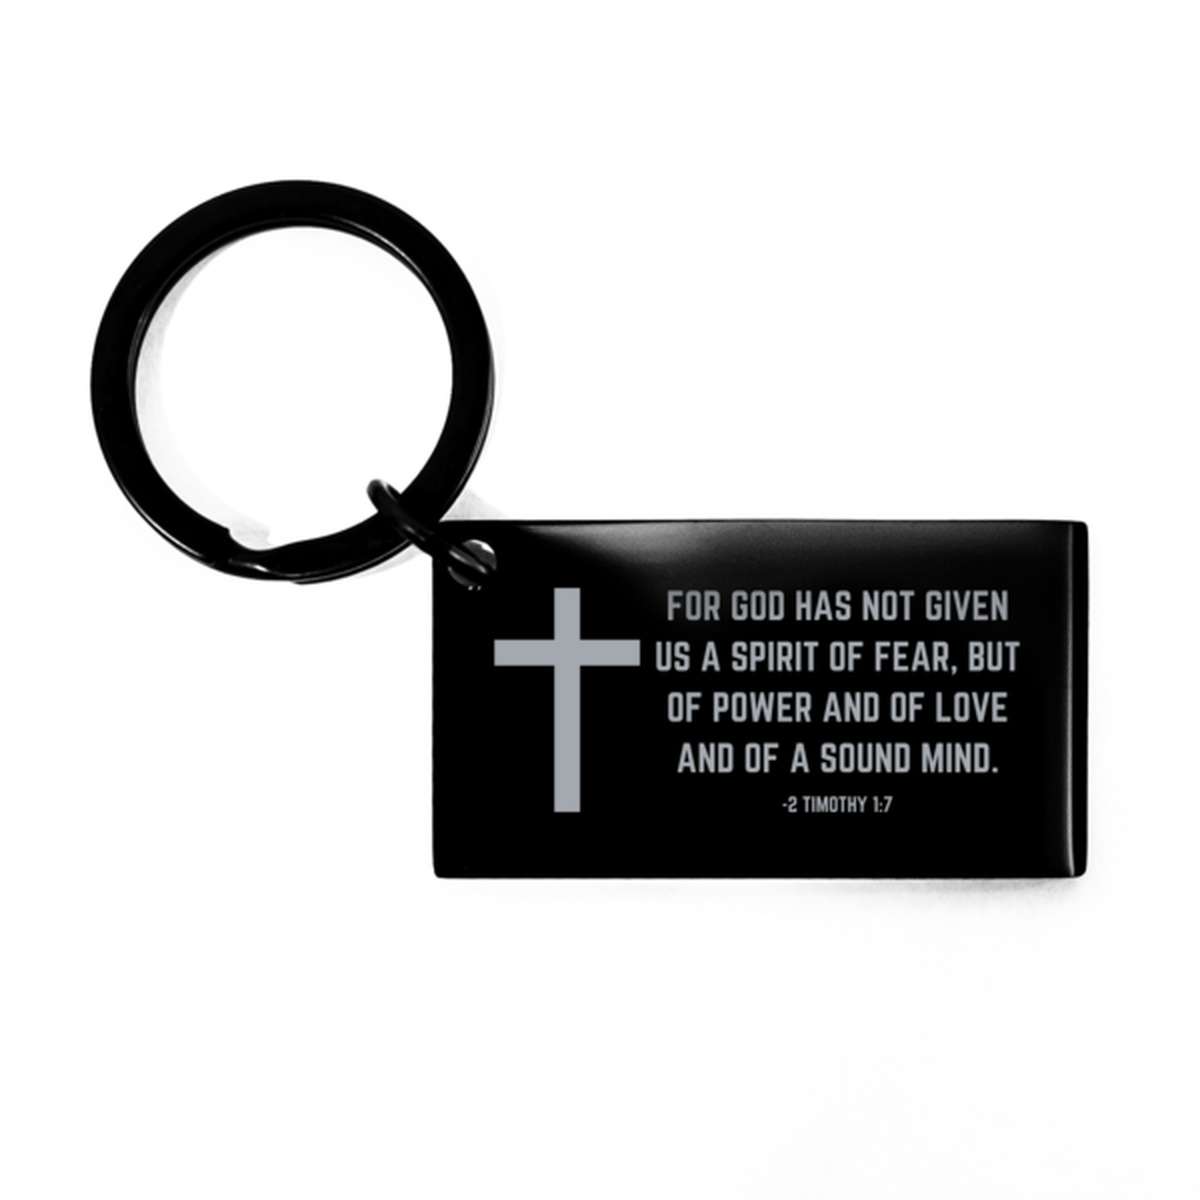 Baptism Gifts For Teenage Boys Girls, Christian Bible Verse Black Keychain, For God has not given us, Confirmation Gifts, Bible Verse Keyring for Son, Godson, Grandson, Nephew